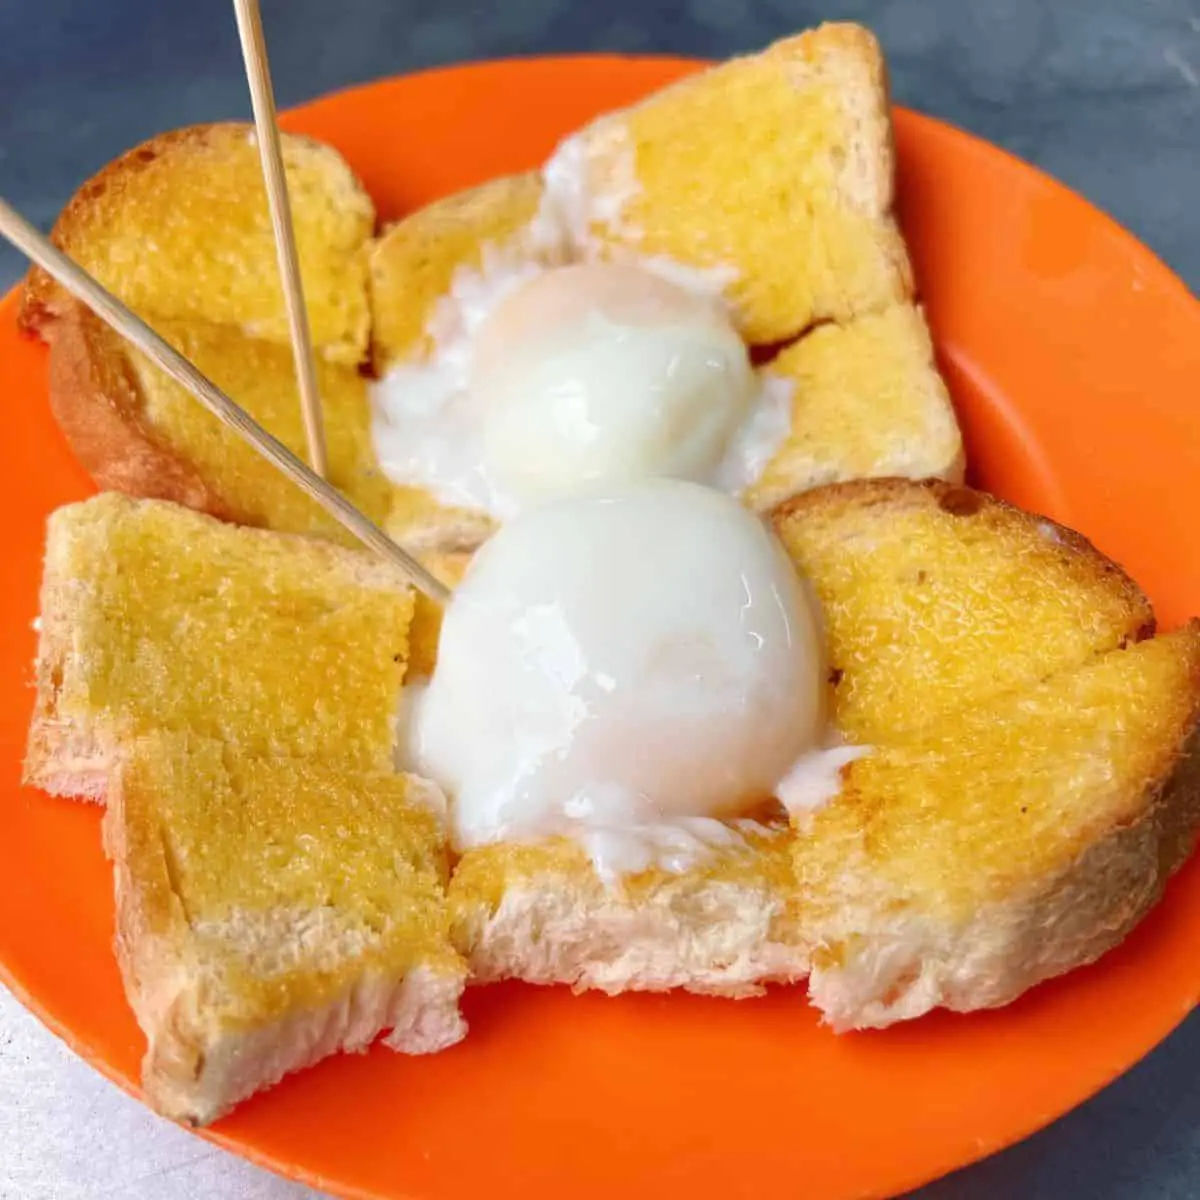 Mouthwatering Roti Bakar plate from Toh Soon Cafe in Penang